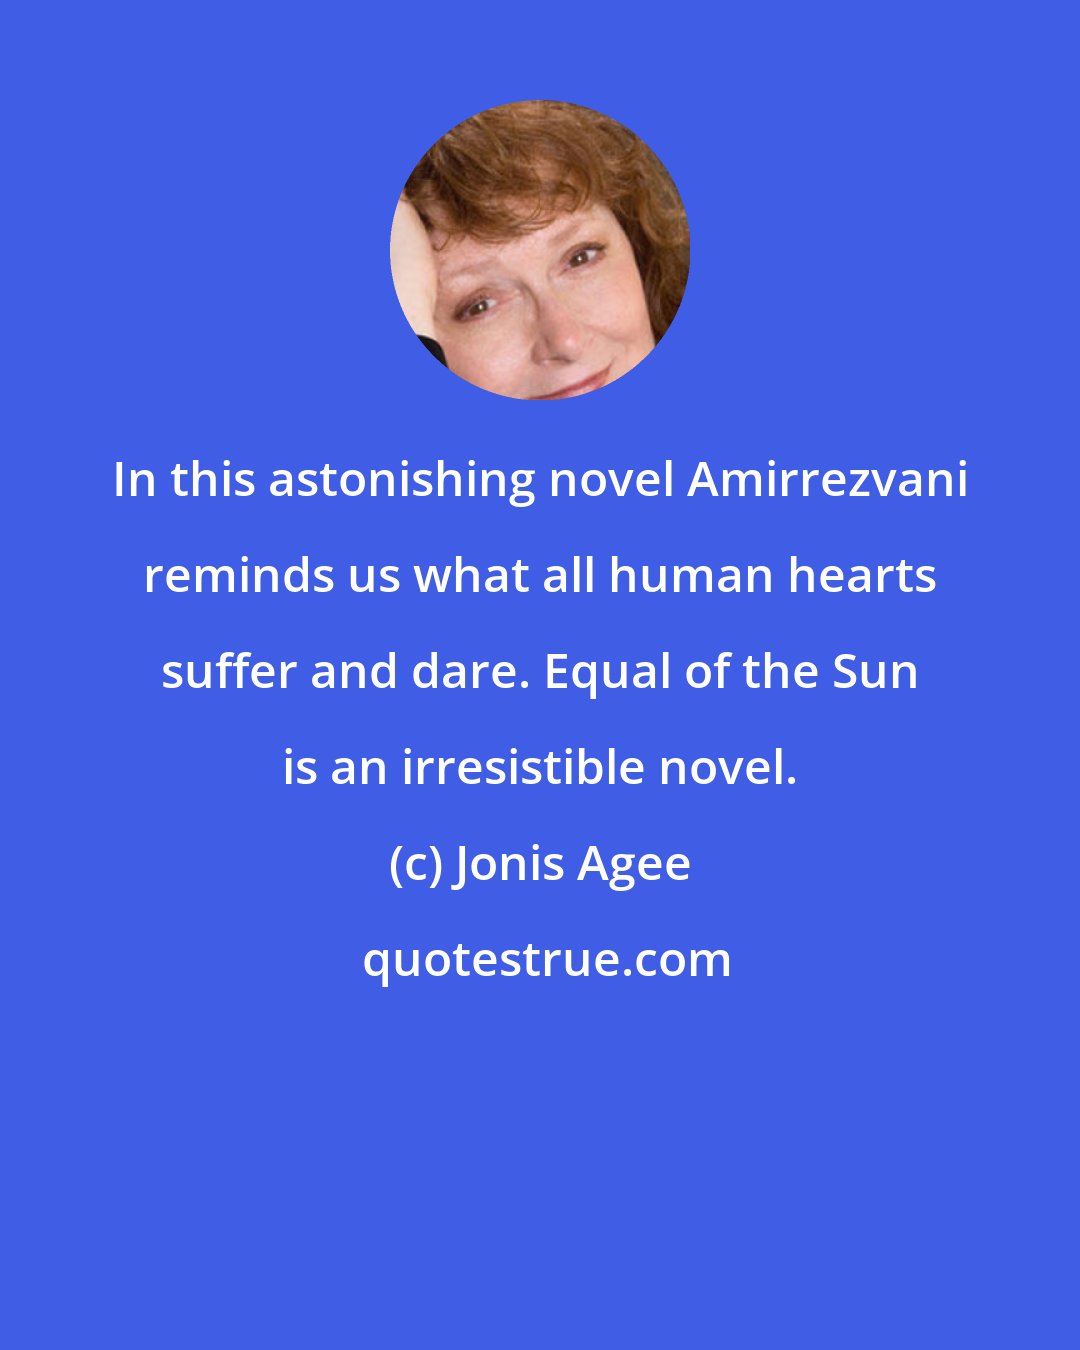 Jonis Agee: In this astonishing novel Amirrezvani reminds us what all human hearts suffer and dare. Equal of the Sun is an irresistible novel.